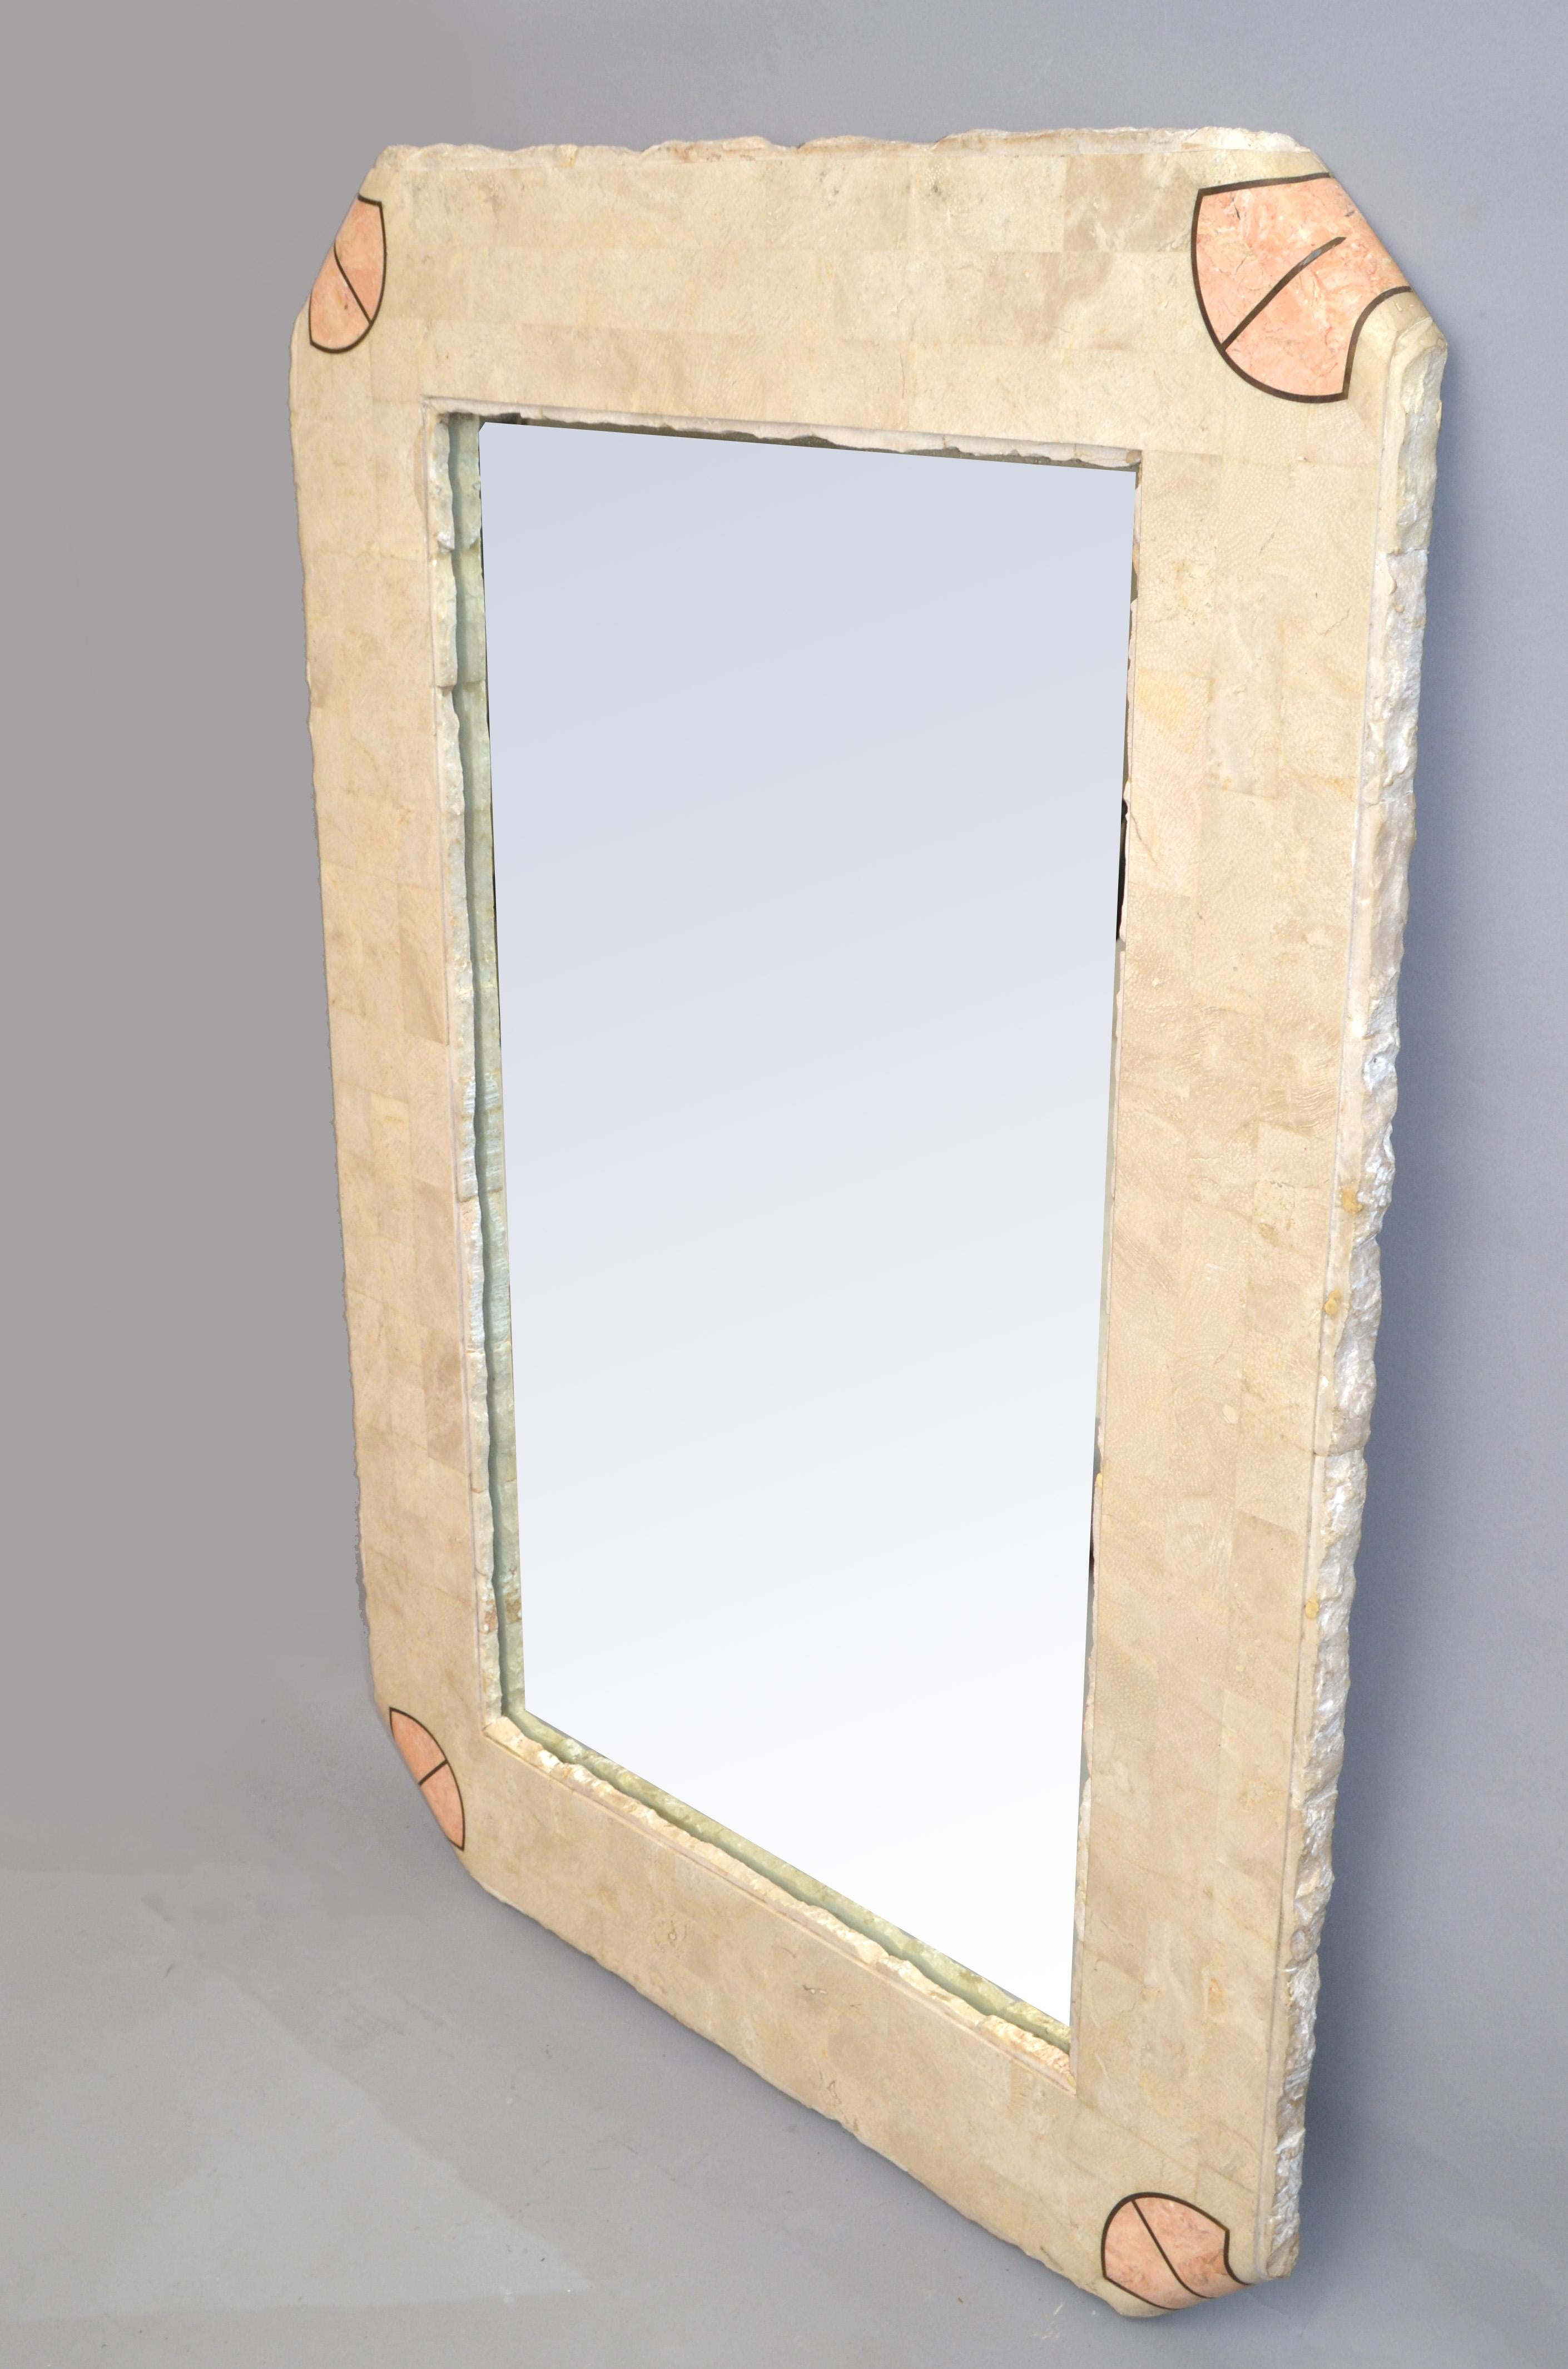 Handcrafted rectangle Stone over Wood tessellated mirror with beige and apricot color stone crossbands with Brass inlays.
Asian Modern made in the Philippines for Maitland Smith in the 1980.
Mid-Century Modern Design for any interior Style.
Mirror